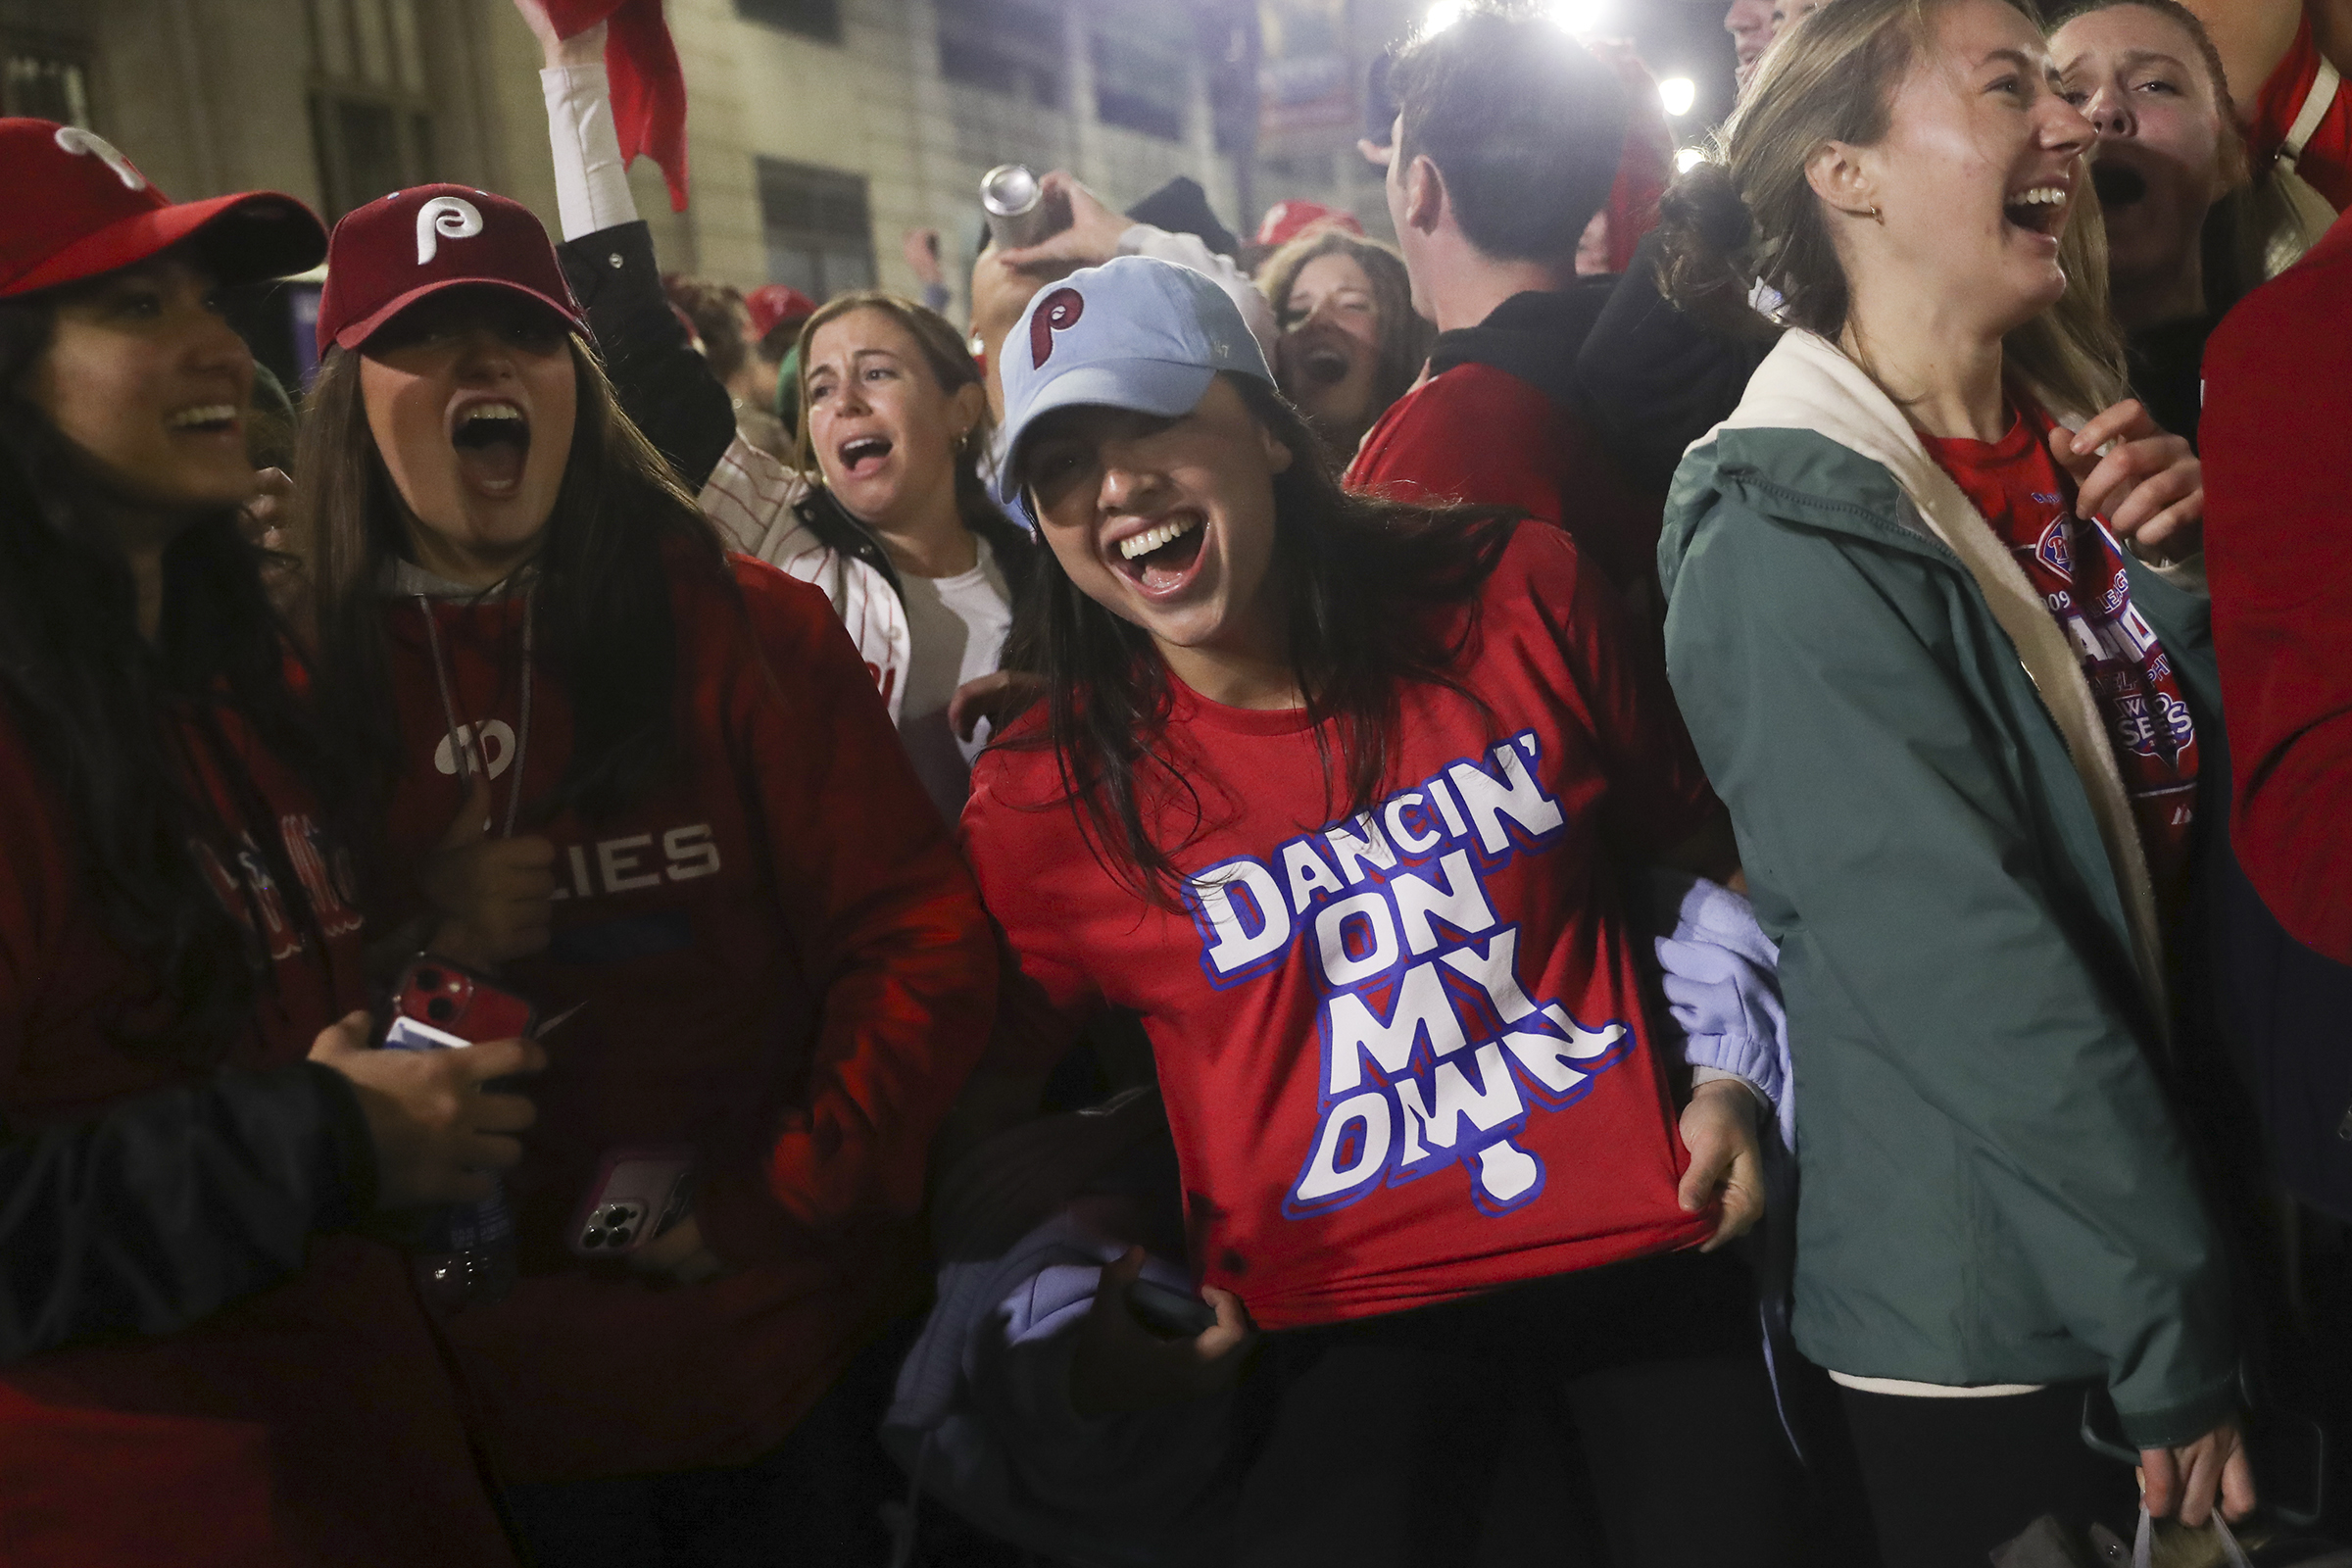 Phillies' fans were electric for World Series' return to South Philly